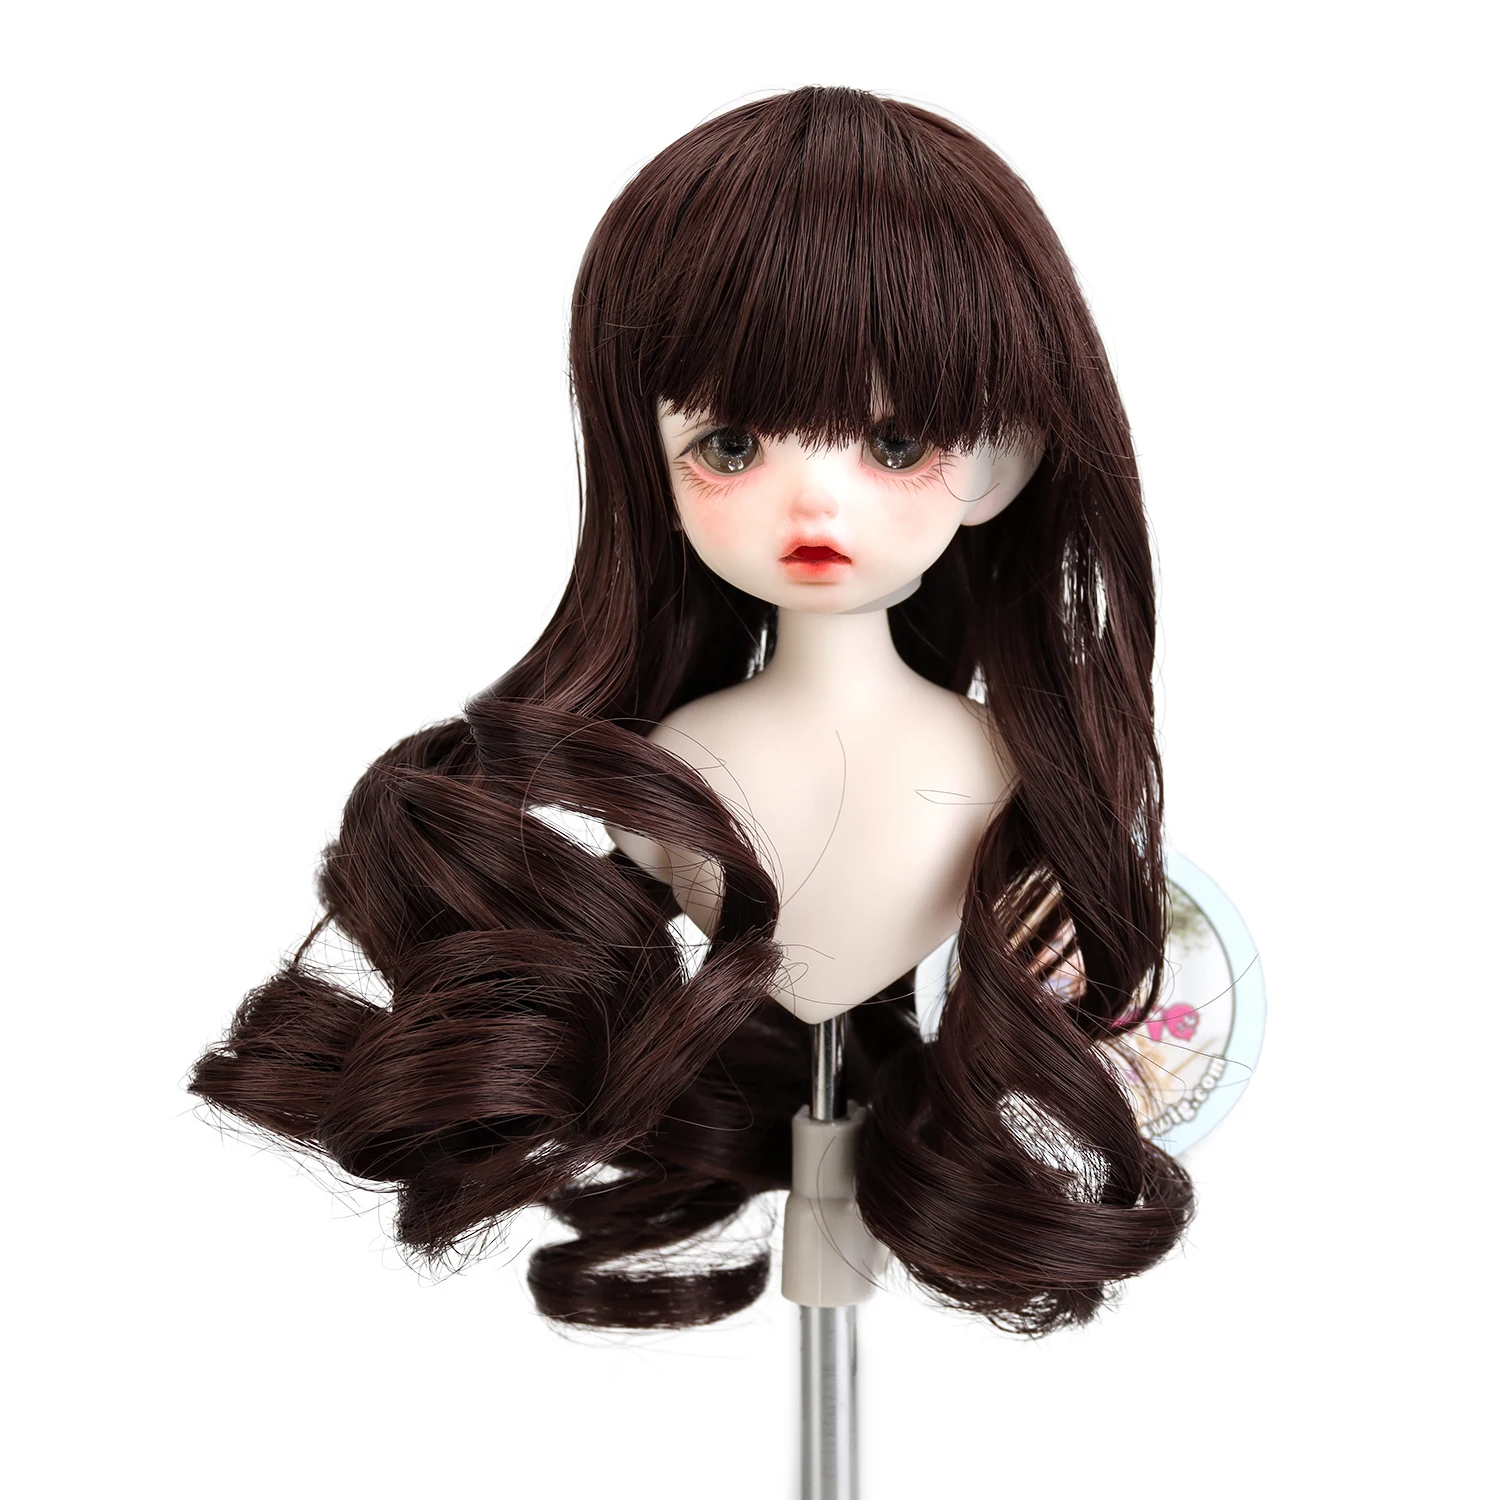 1/6 BJD Doll Wigs 6-7'' Long Curly Natural Color With Bangs MSD DIY Doll Make Accessories Doll Tress Wig Hair